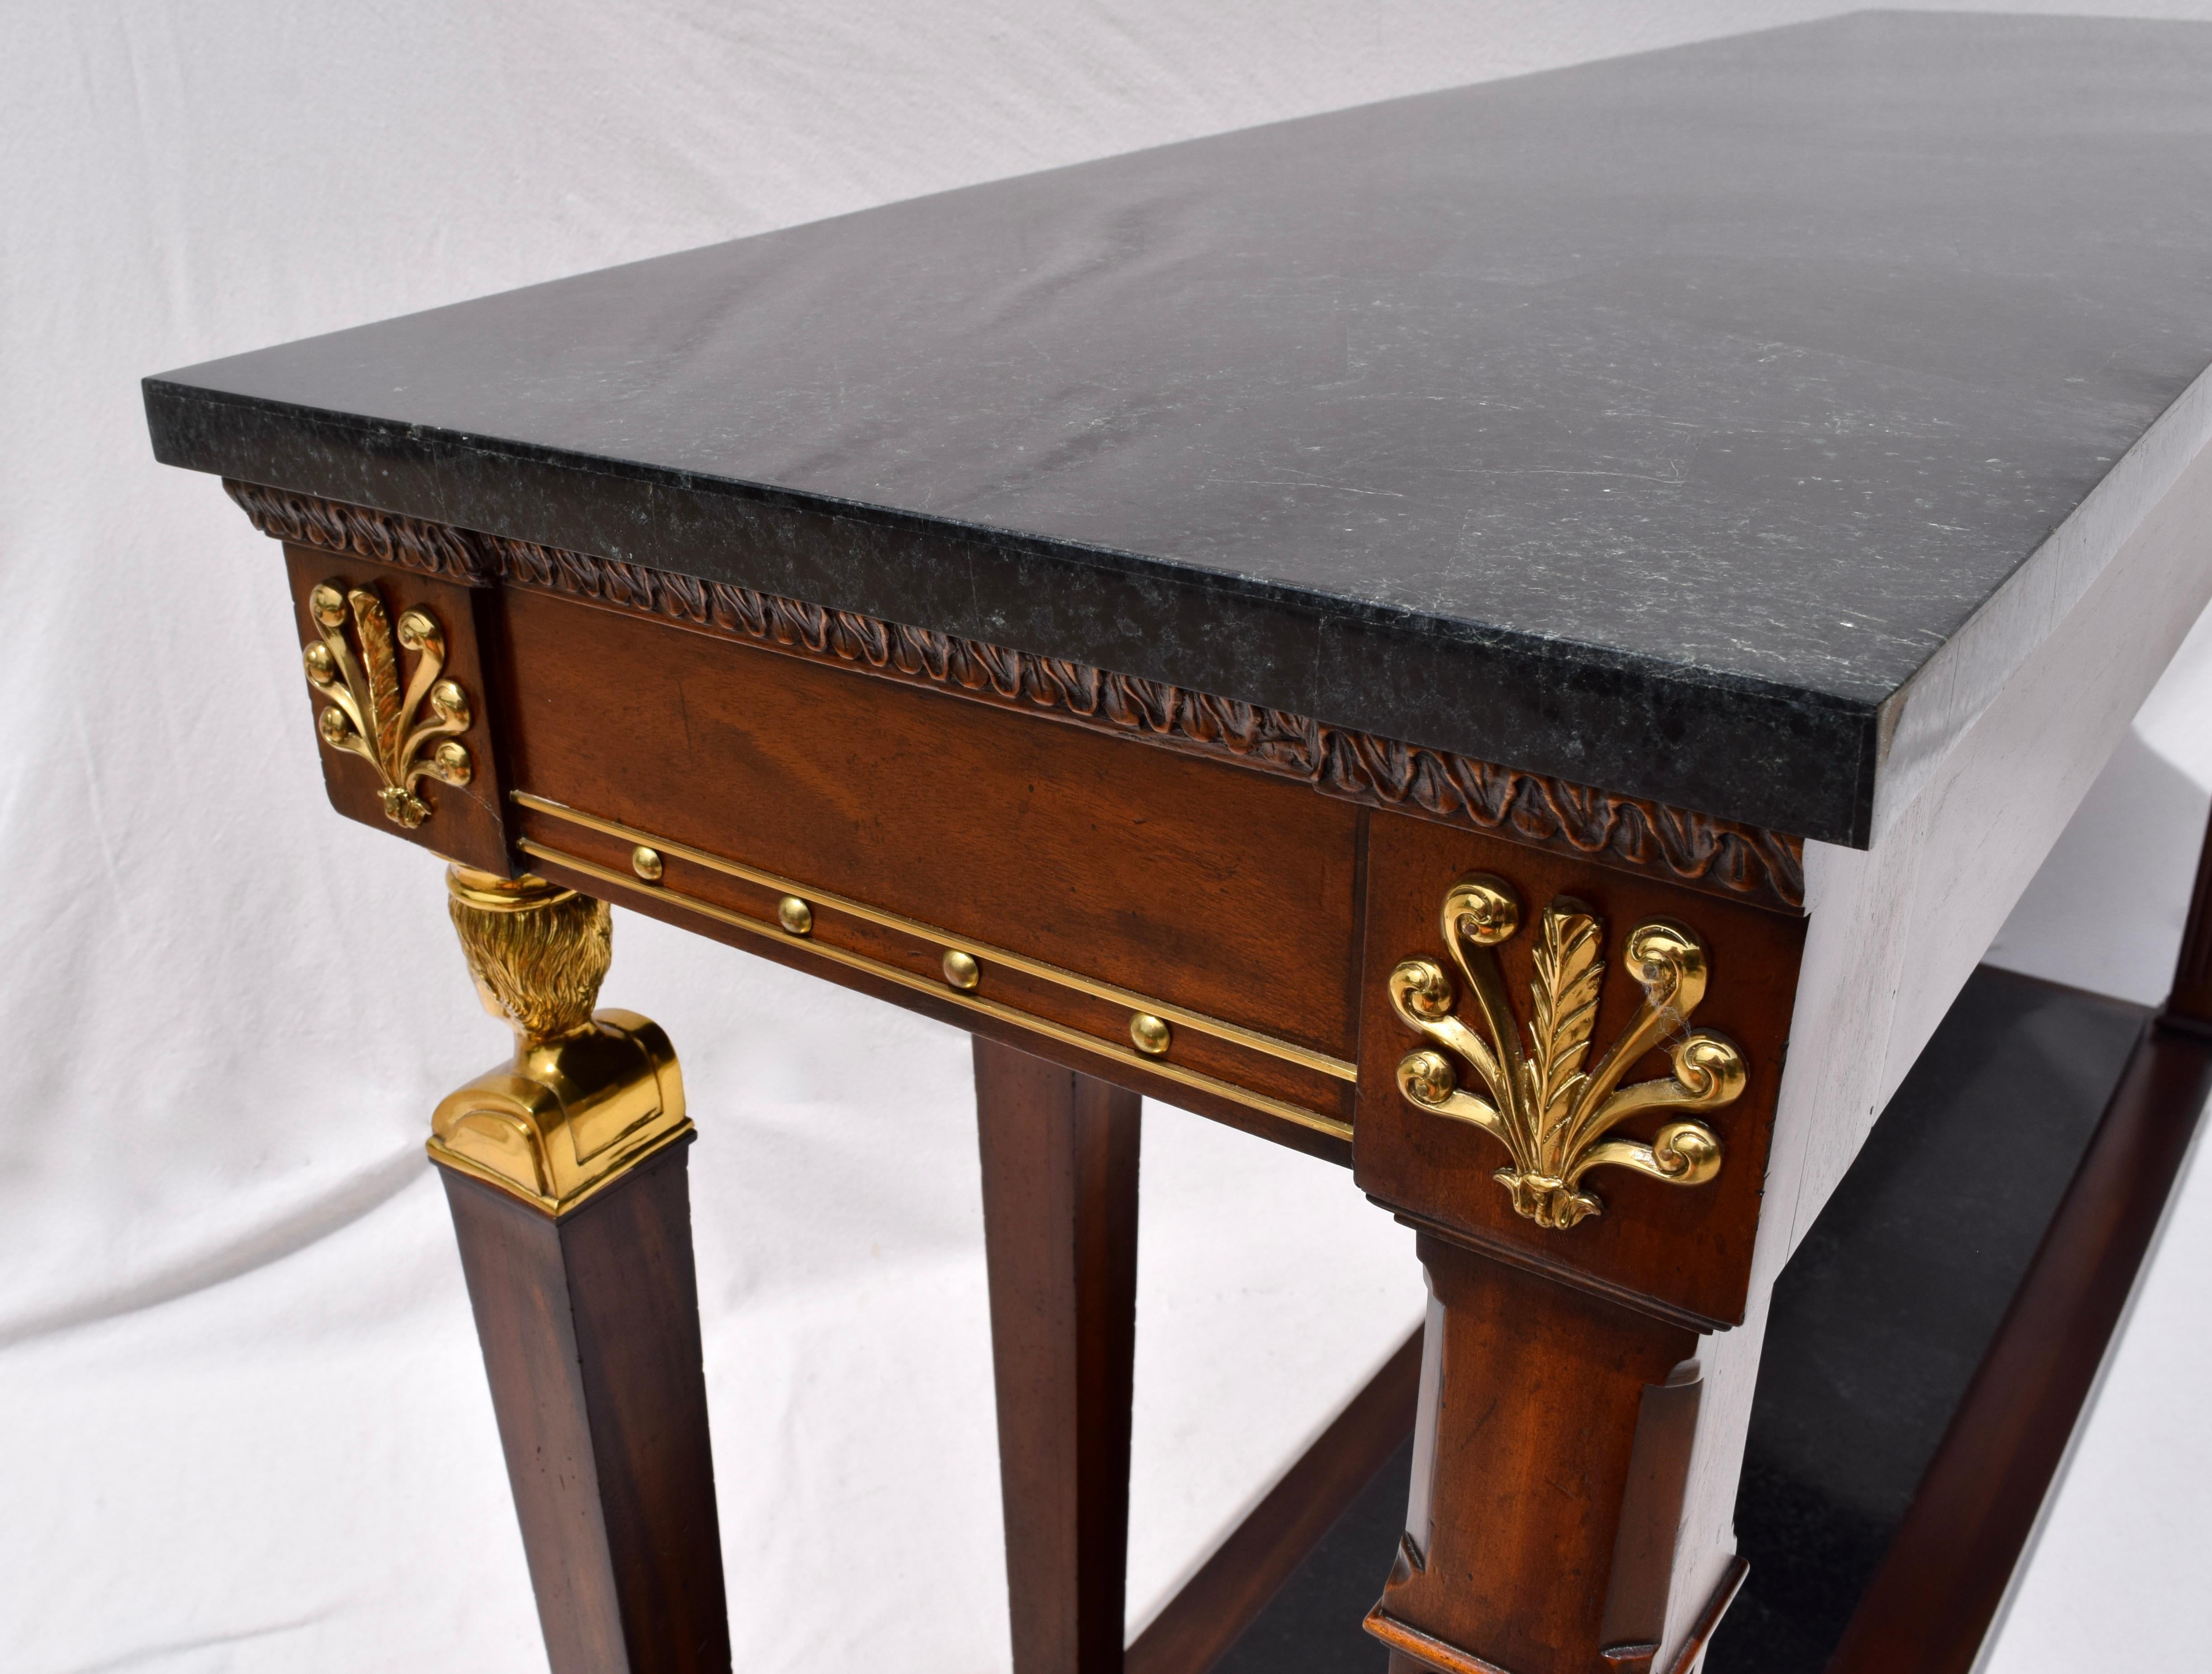 Neoclassical French Empire Style Pier Table by Maitland Smith 7